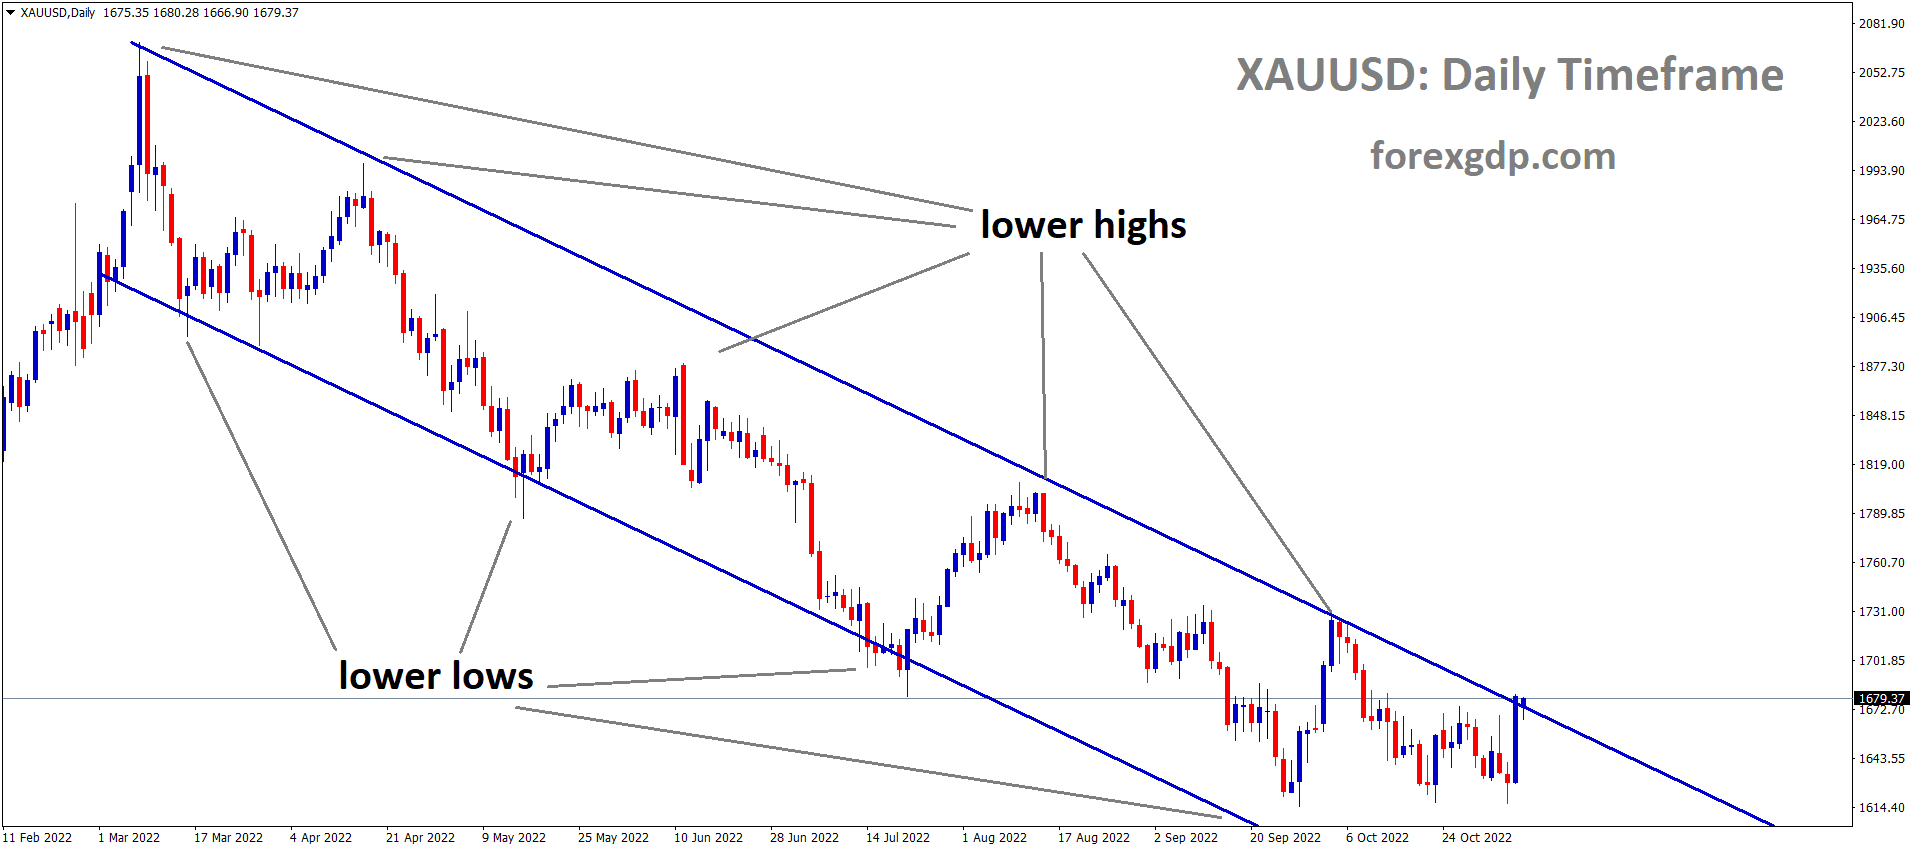 XAUUSD Gold price is moving in the Descending channel and the market has reached the Lower high area of the channel 1